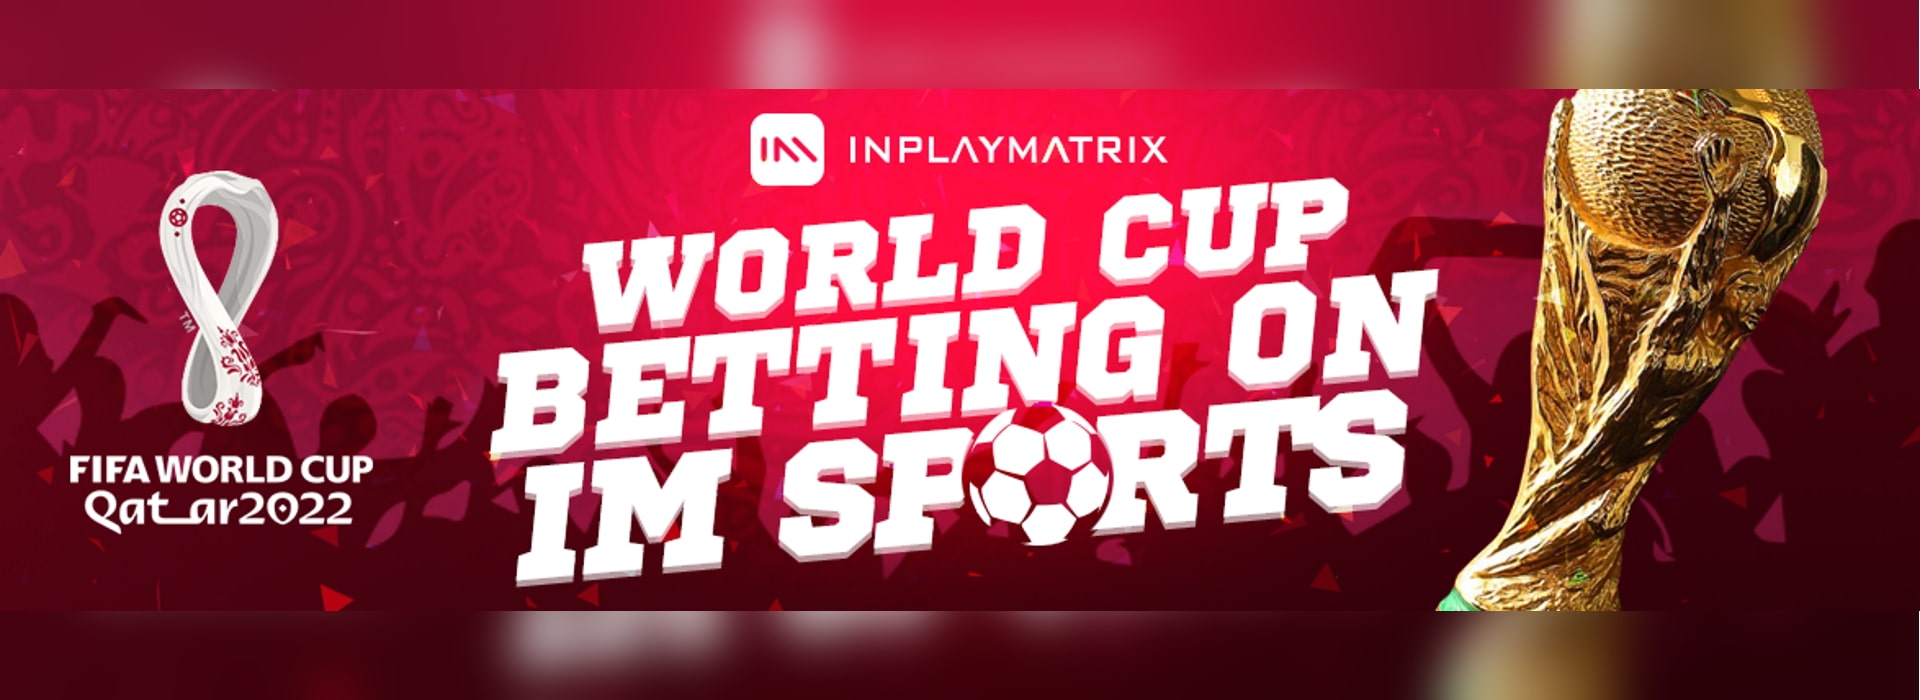 World Cup Betting on IM Sports